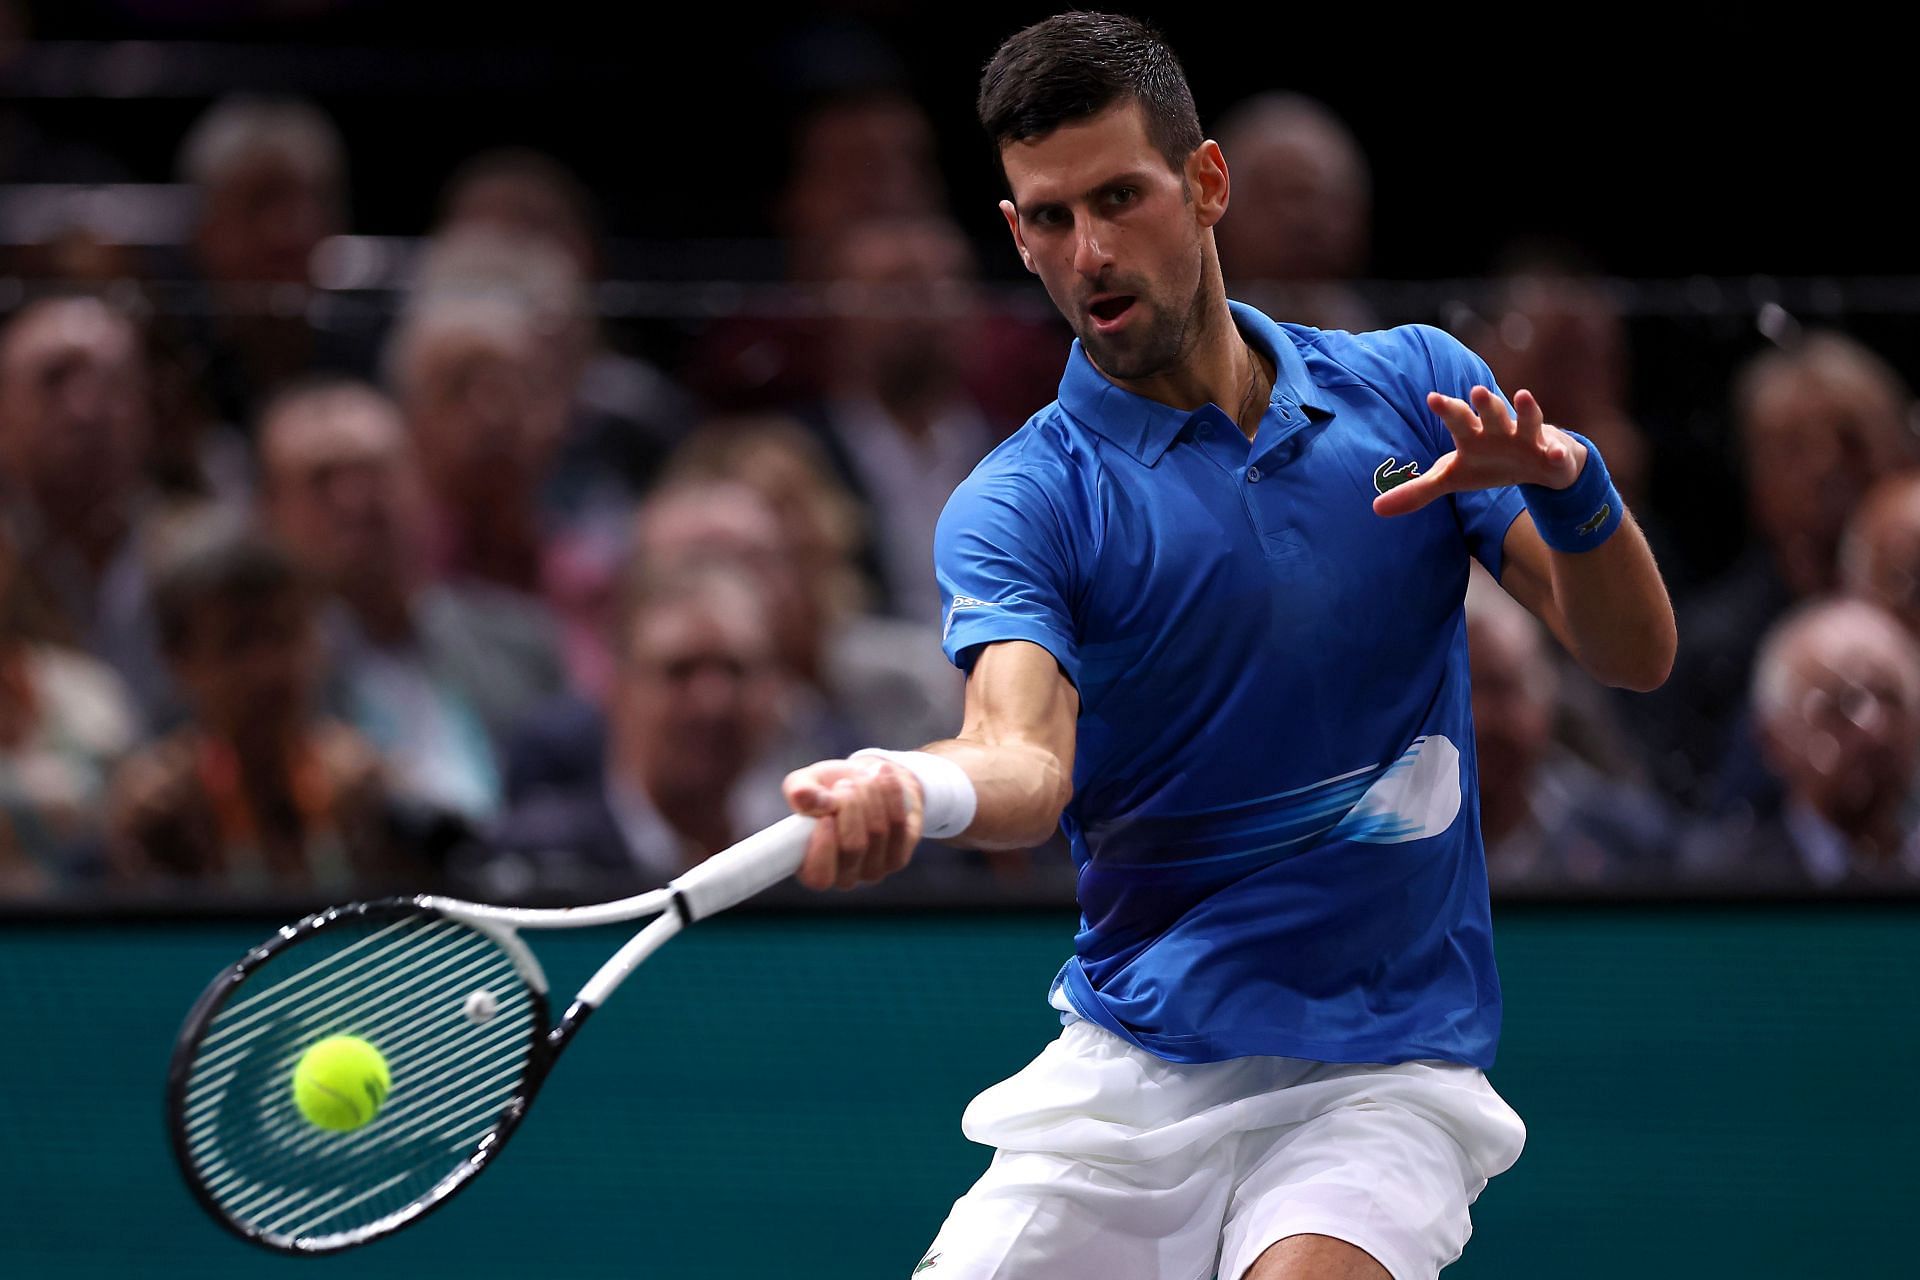 Djokovic in action at the Rolex Paris Masters